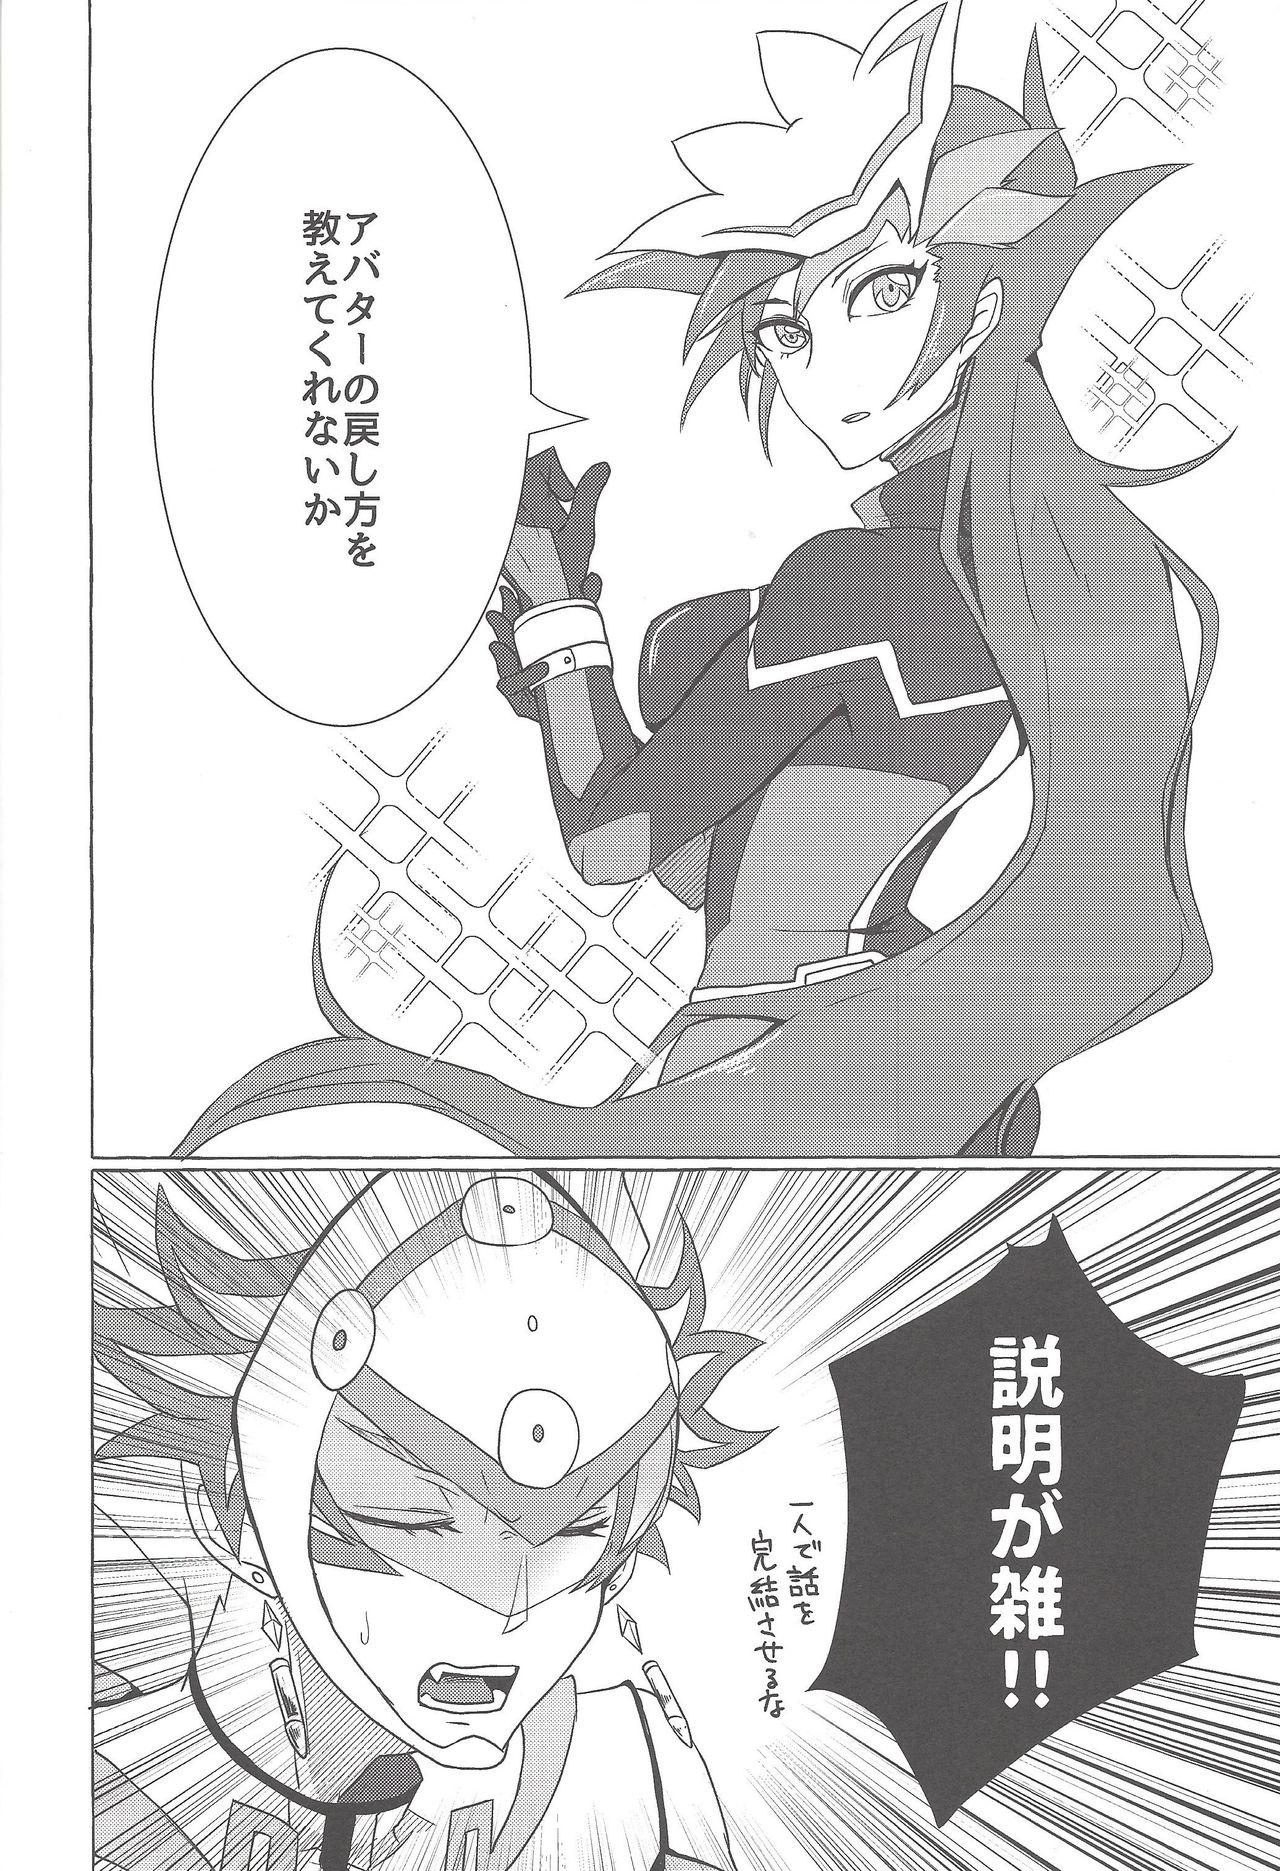 Spy Camera Instant Unreal - Yu-gi-oh vrains Hardcorend - Page 3